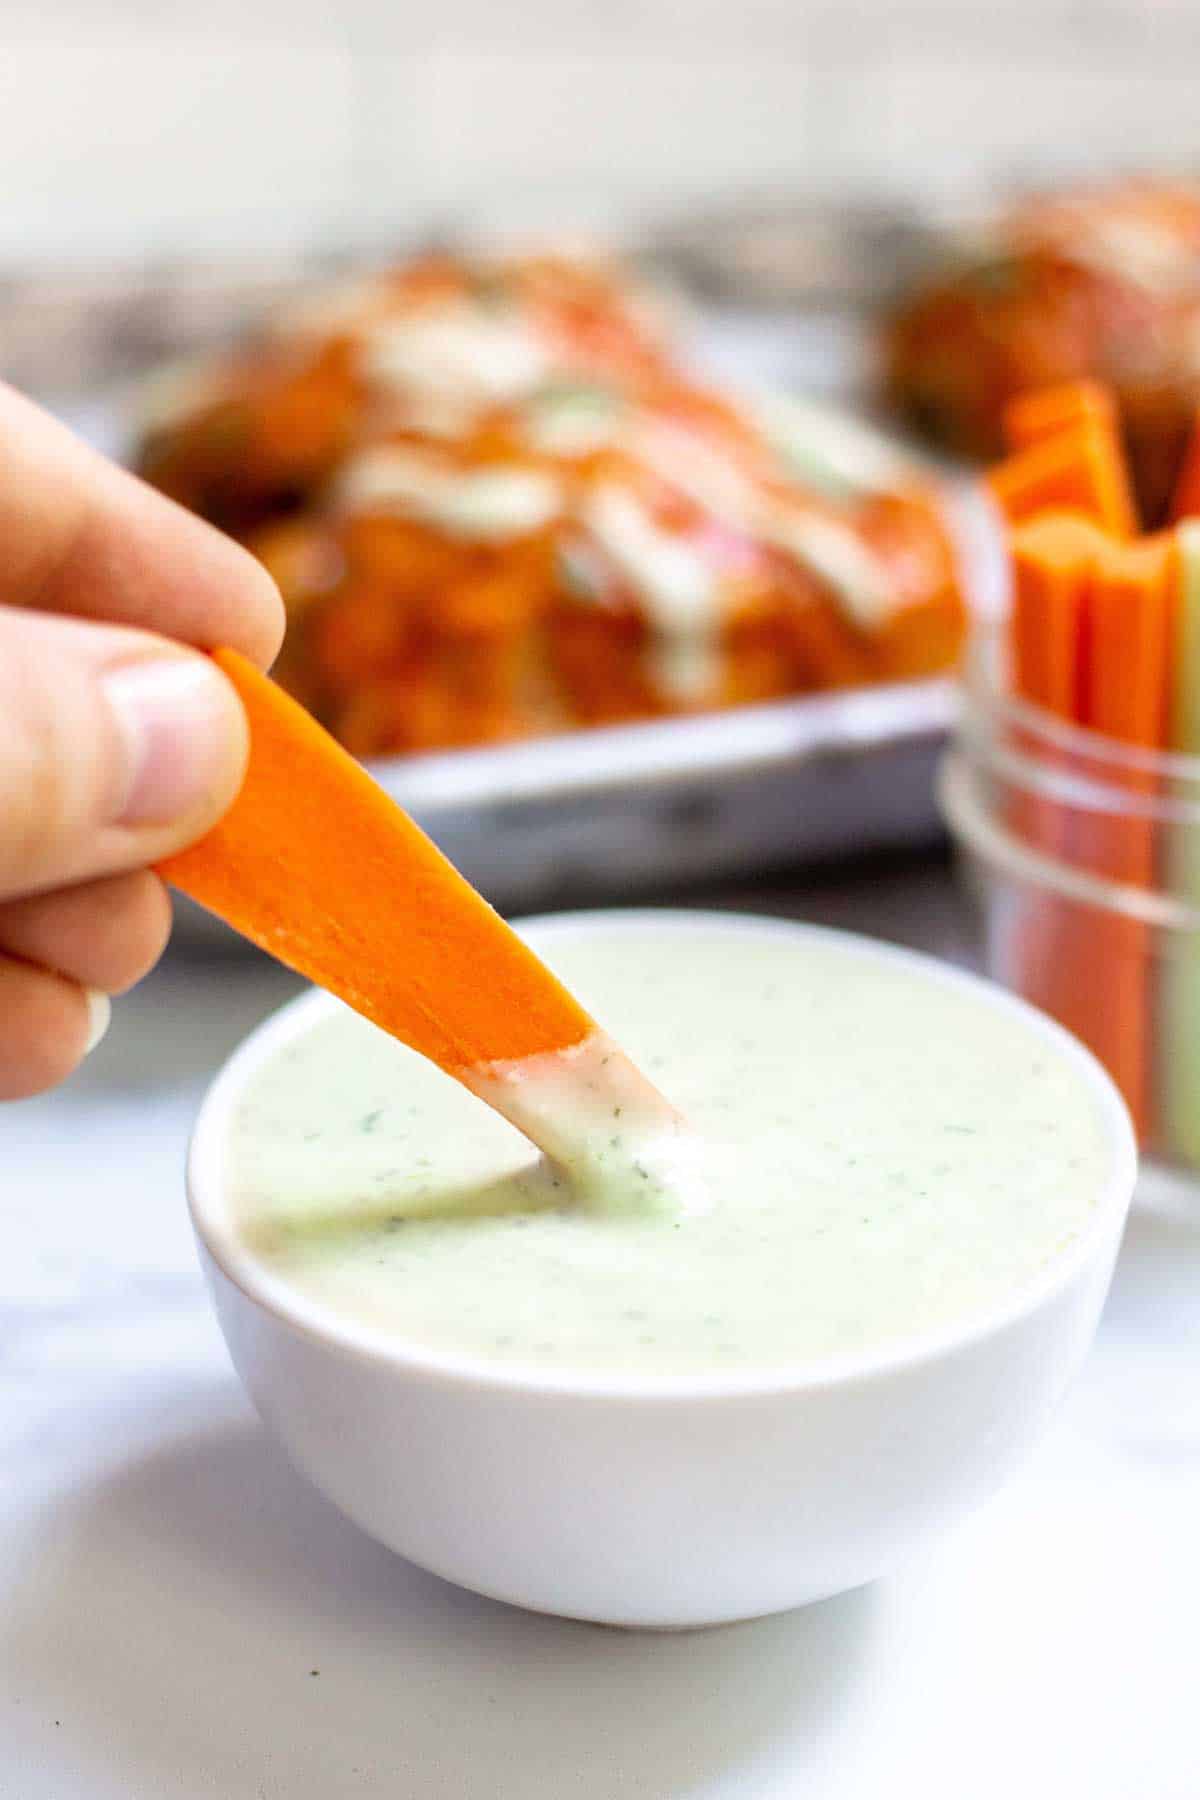 Carrot stick being dipped into small bowl of avocado lime ranch dressing.